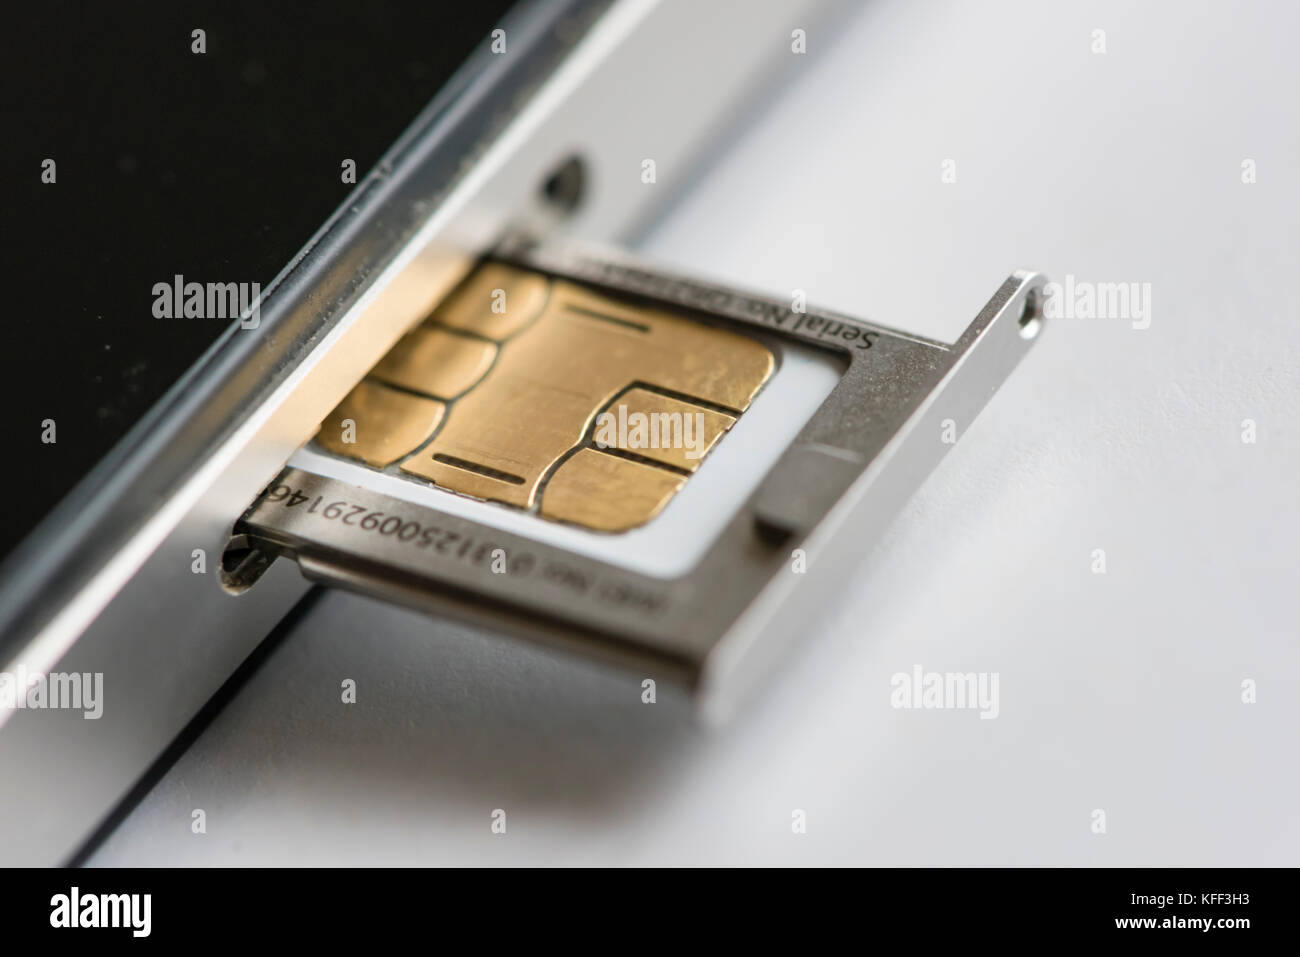 A micro SIM-card is inserted into an Apple iphone 4 smartphone. The SIM (Subscriber Identity Module) card holds security keys to identify and authenti Stock Photo